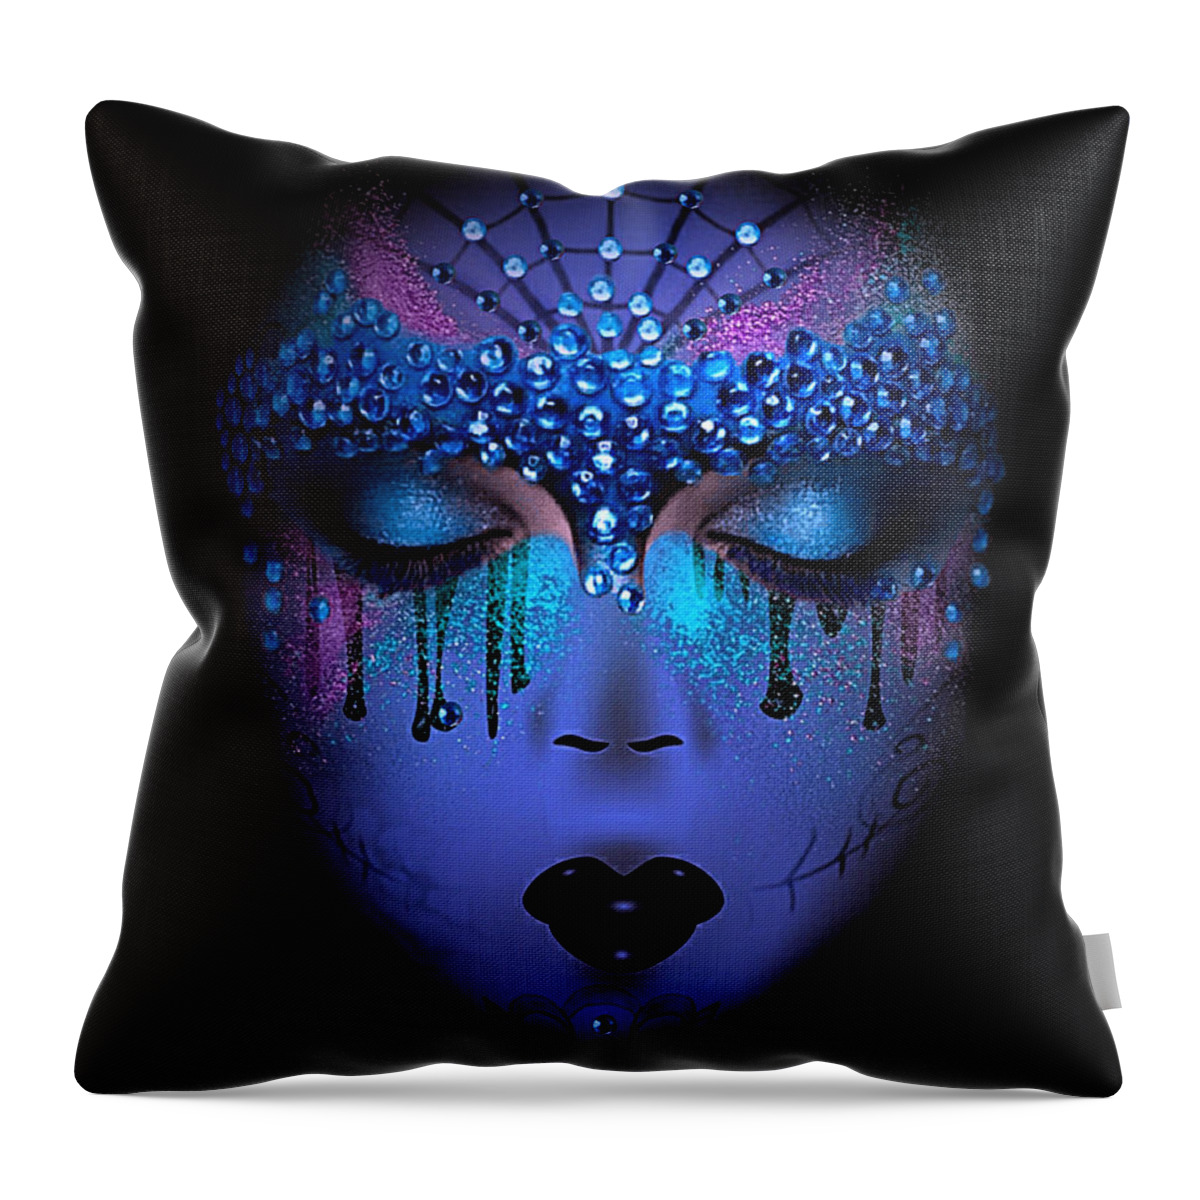  Throw Pillow featuring the digital art See No Evil, Hear no Evil, Speak no Evil by Artful Oasis